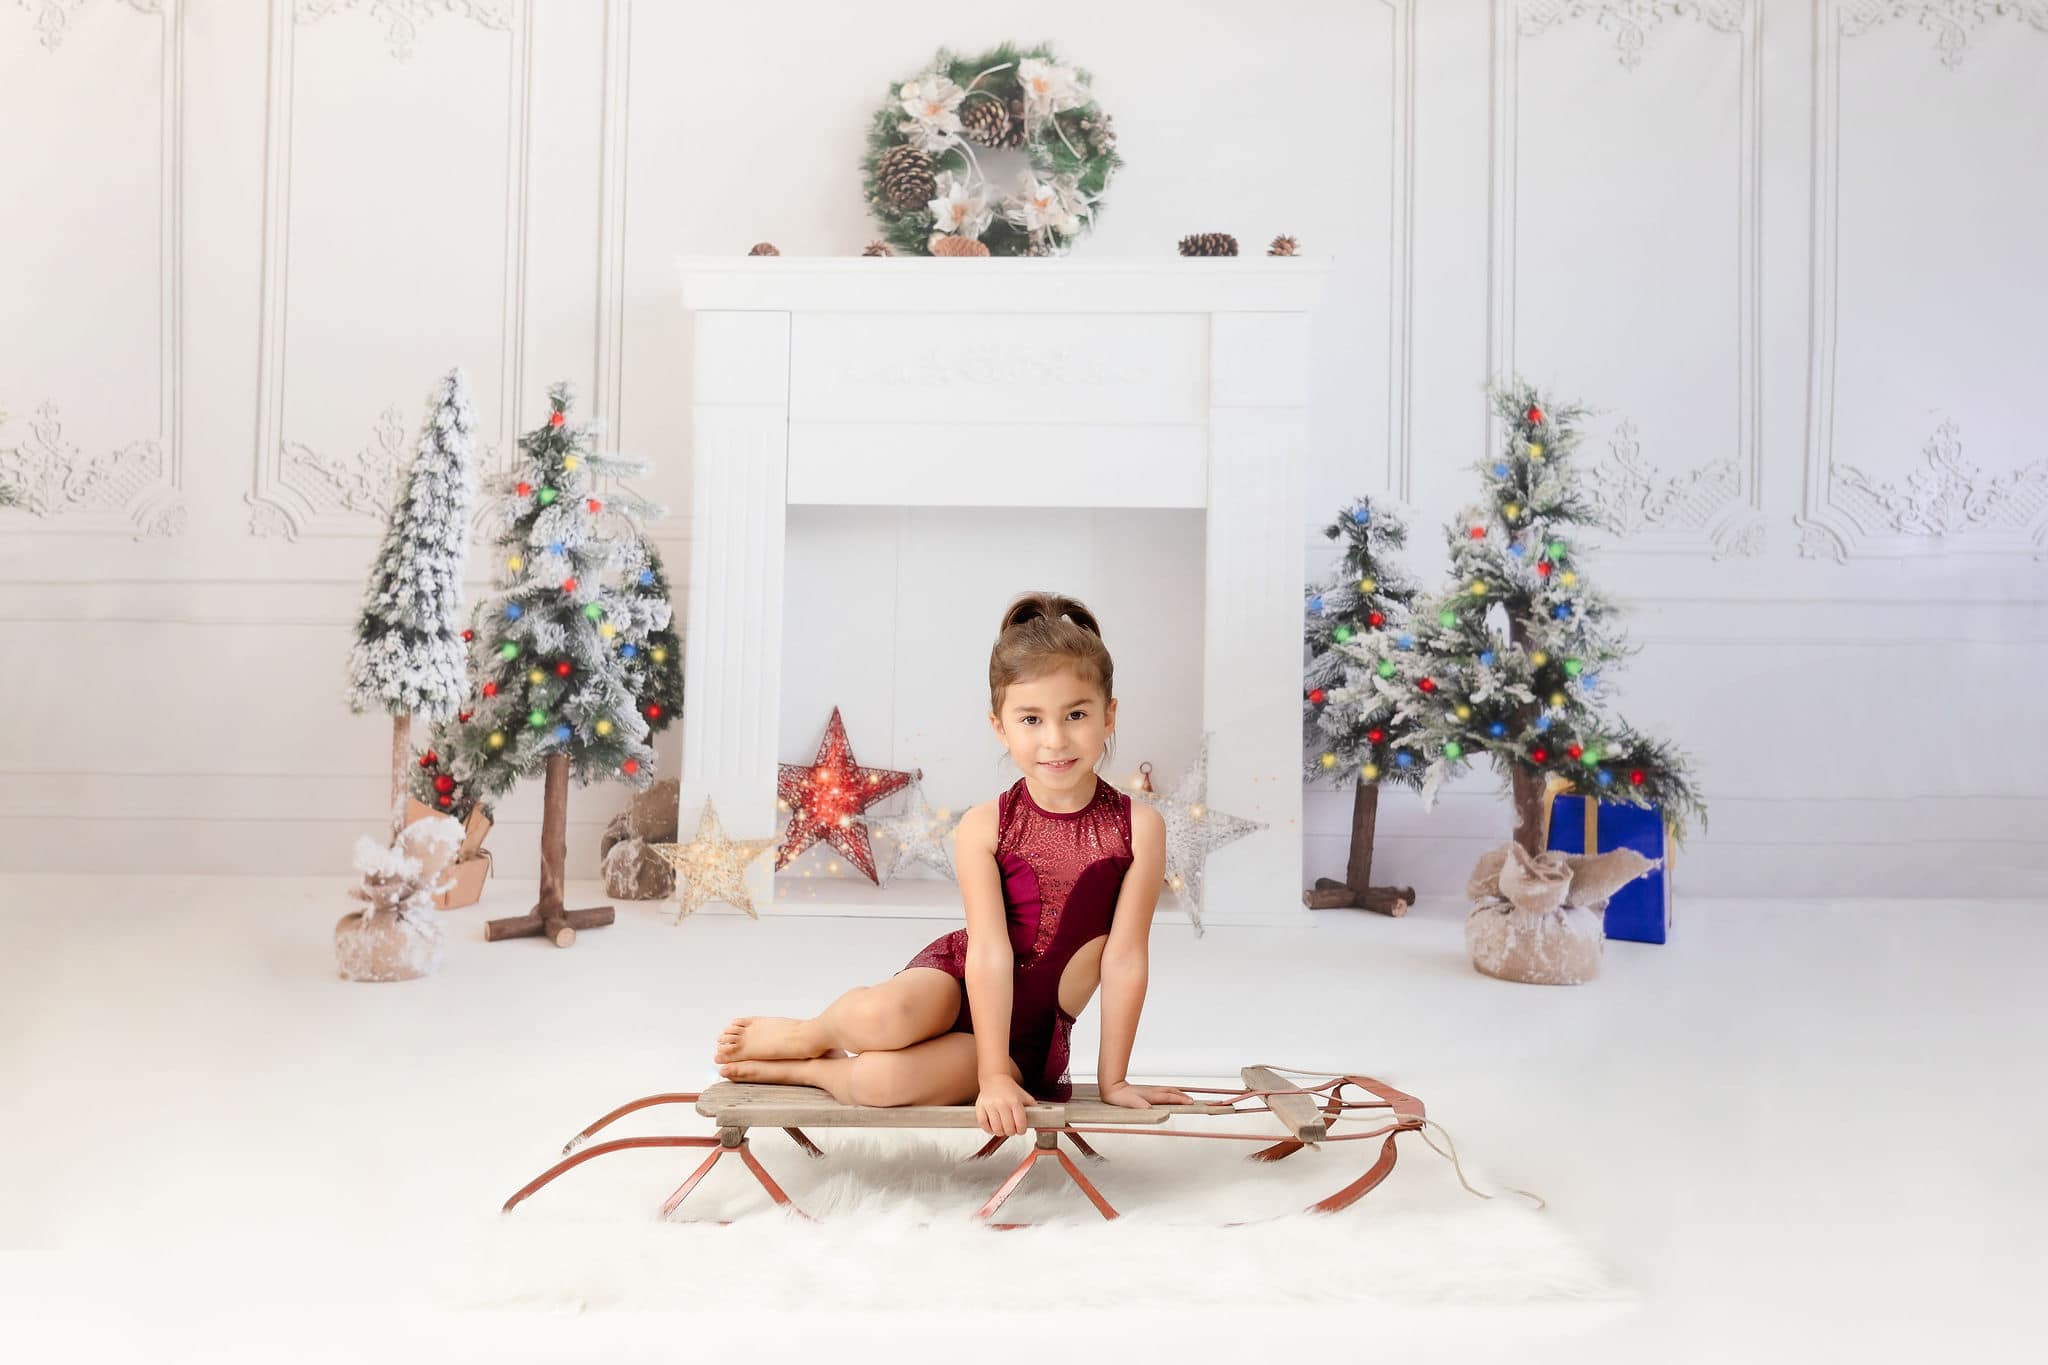 Kate Christmas Closet Winter Backdrop for Photography